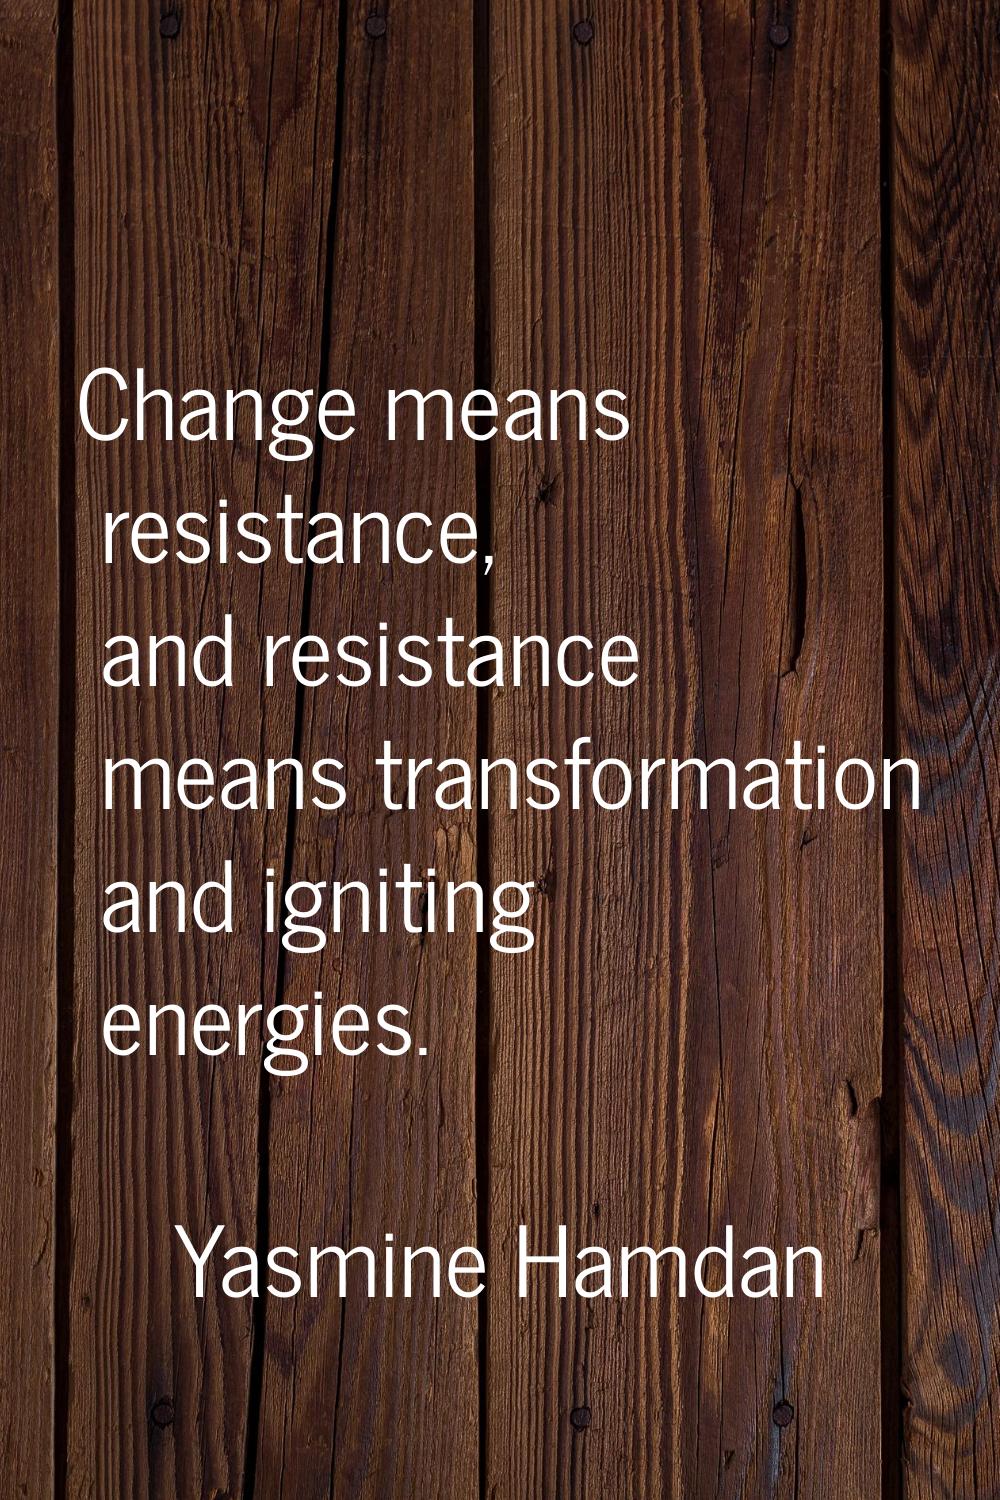 Change means resistance, and resistance means transformation and igniting energies.